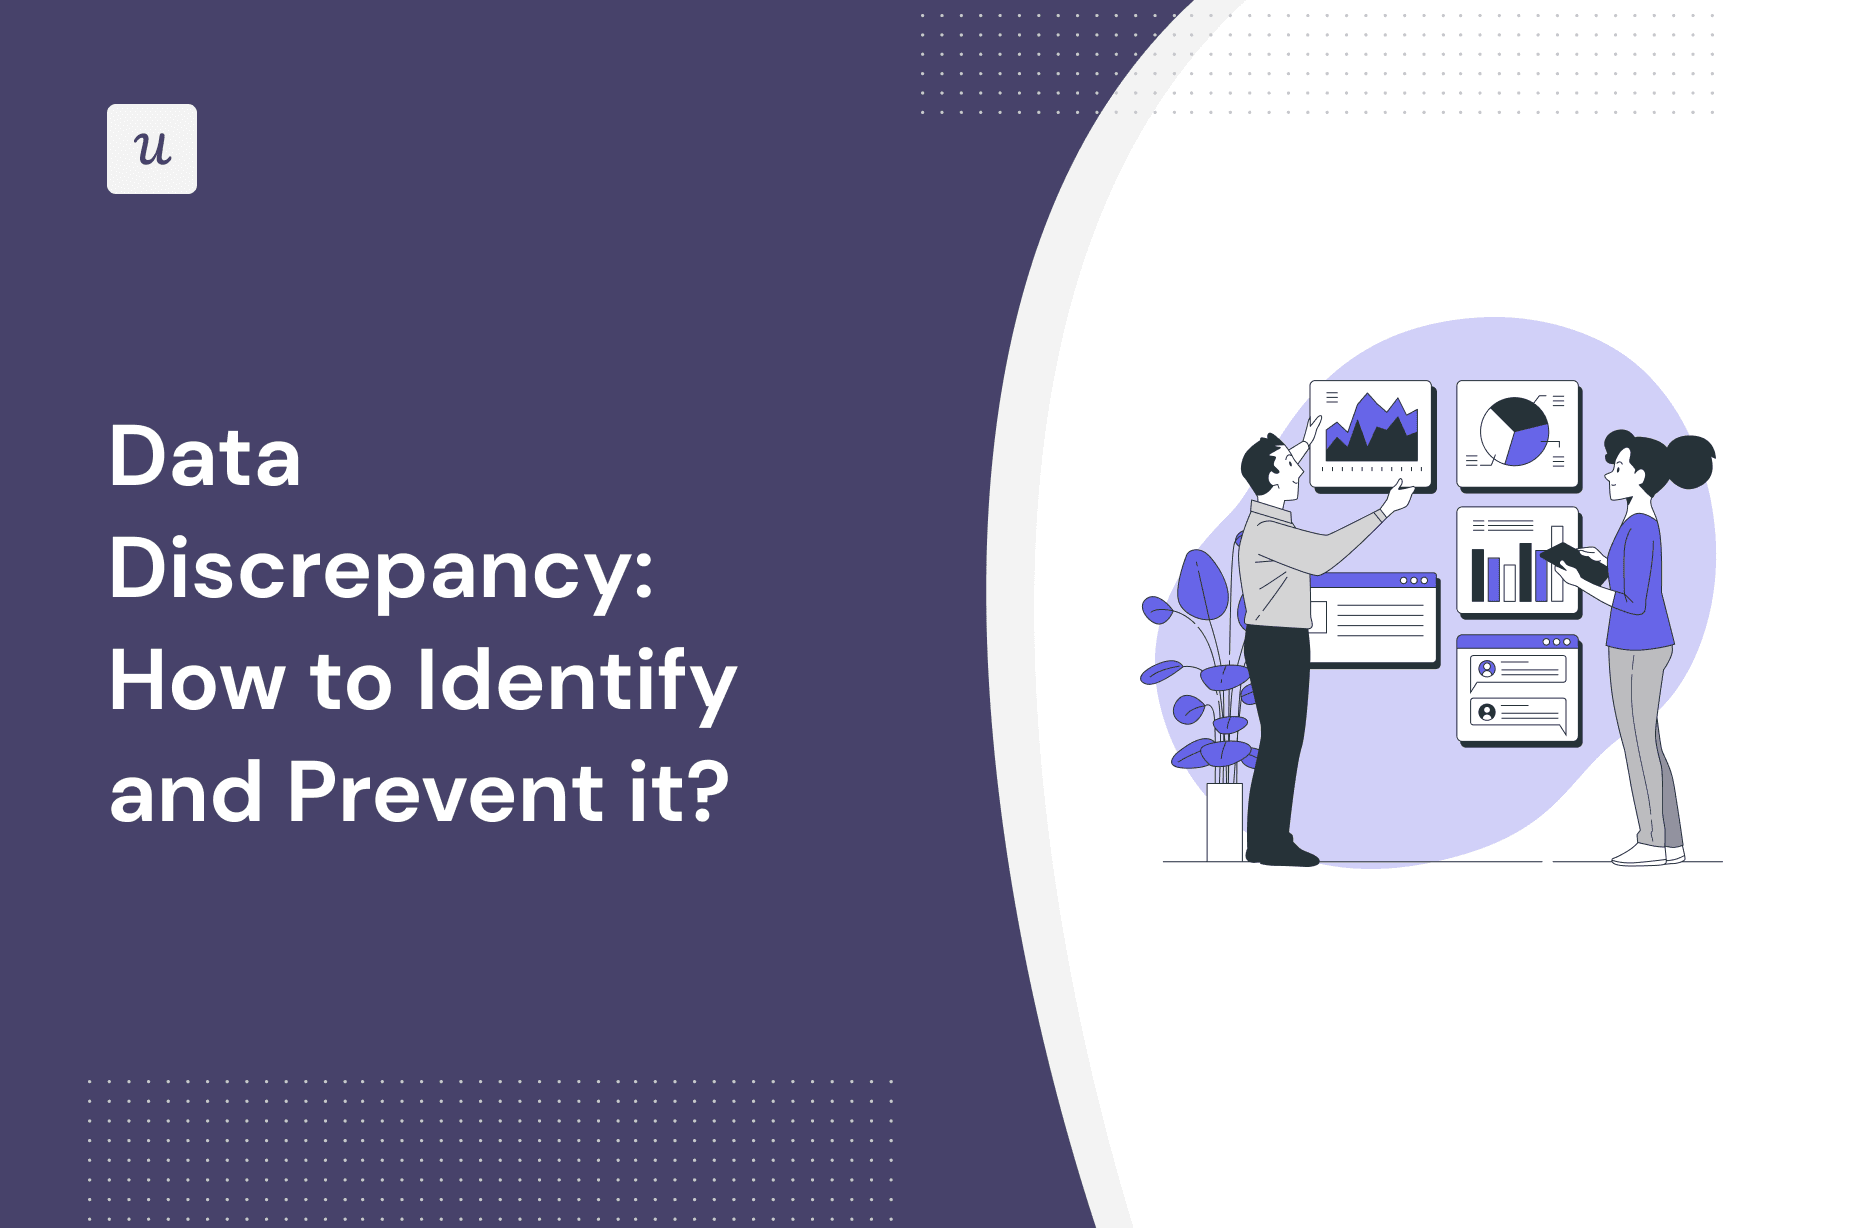 Data Discrepancy: How to Identify and Prevent it? cover